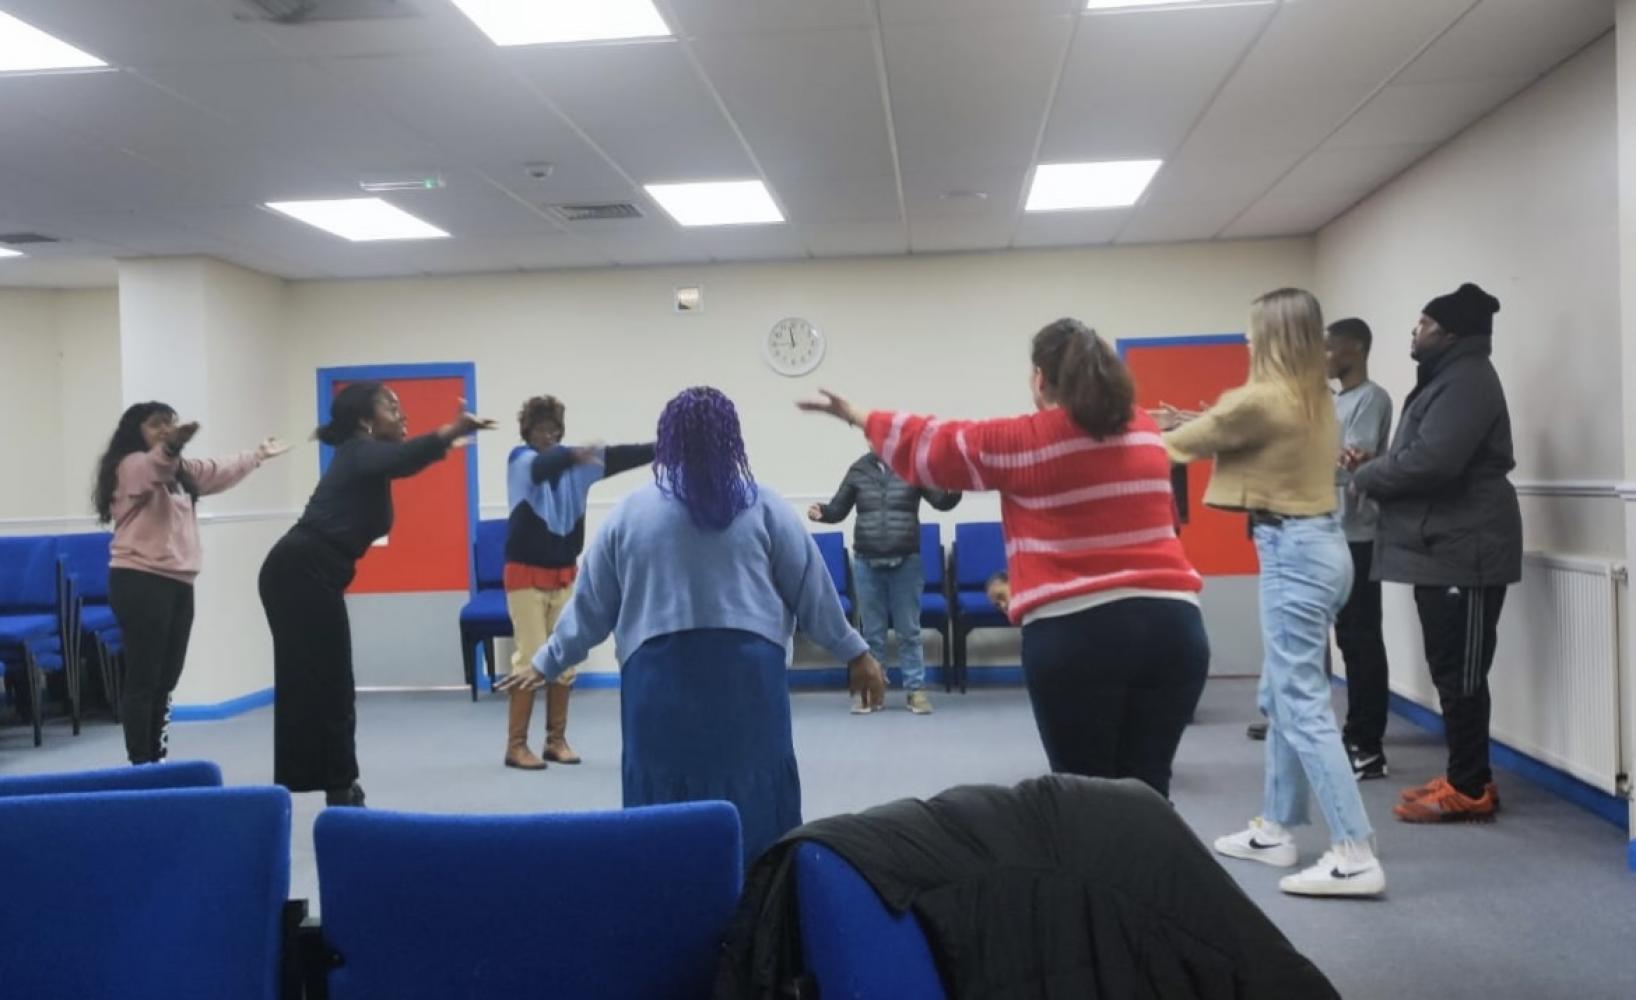 A group of people are practising dance in a circle